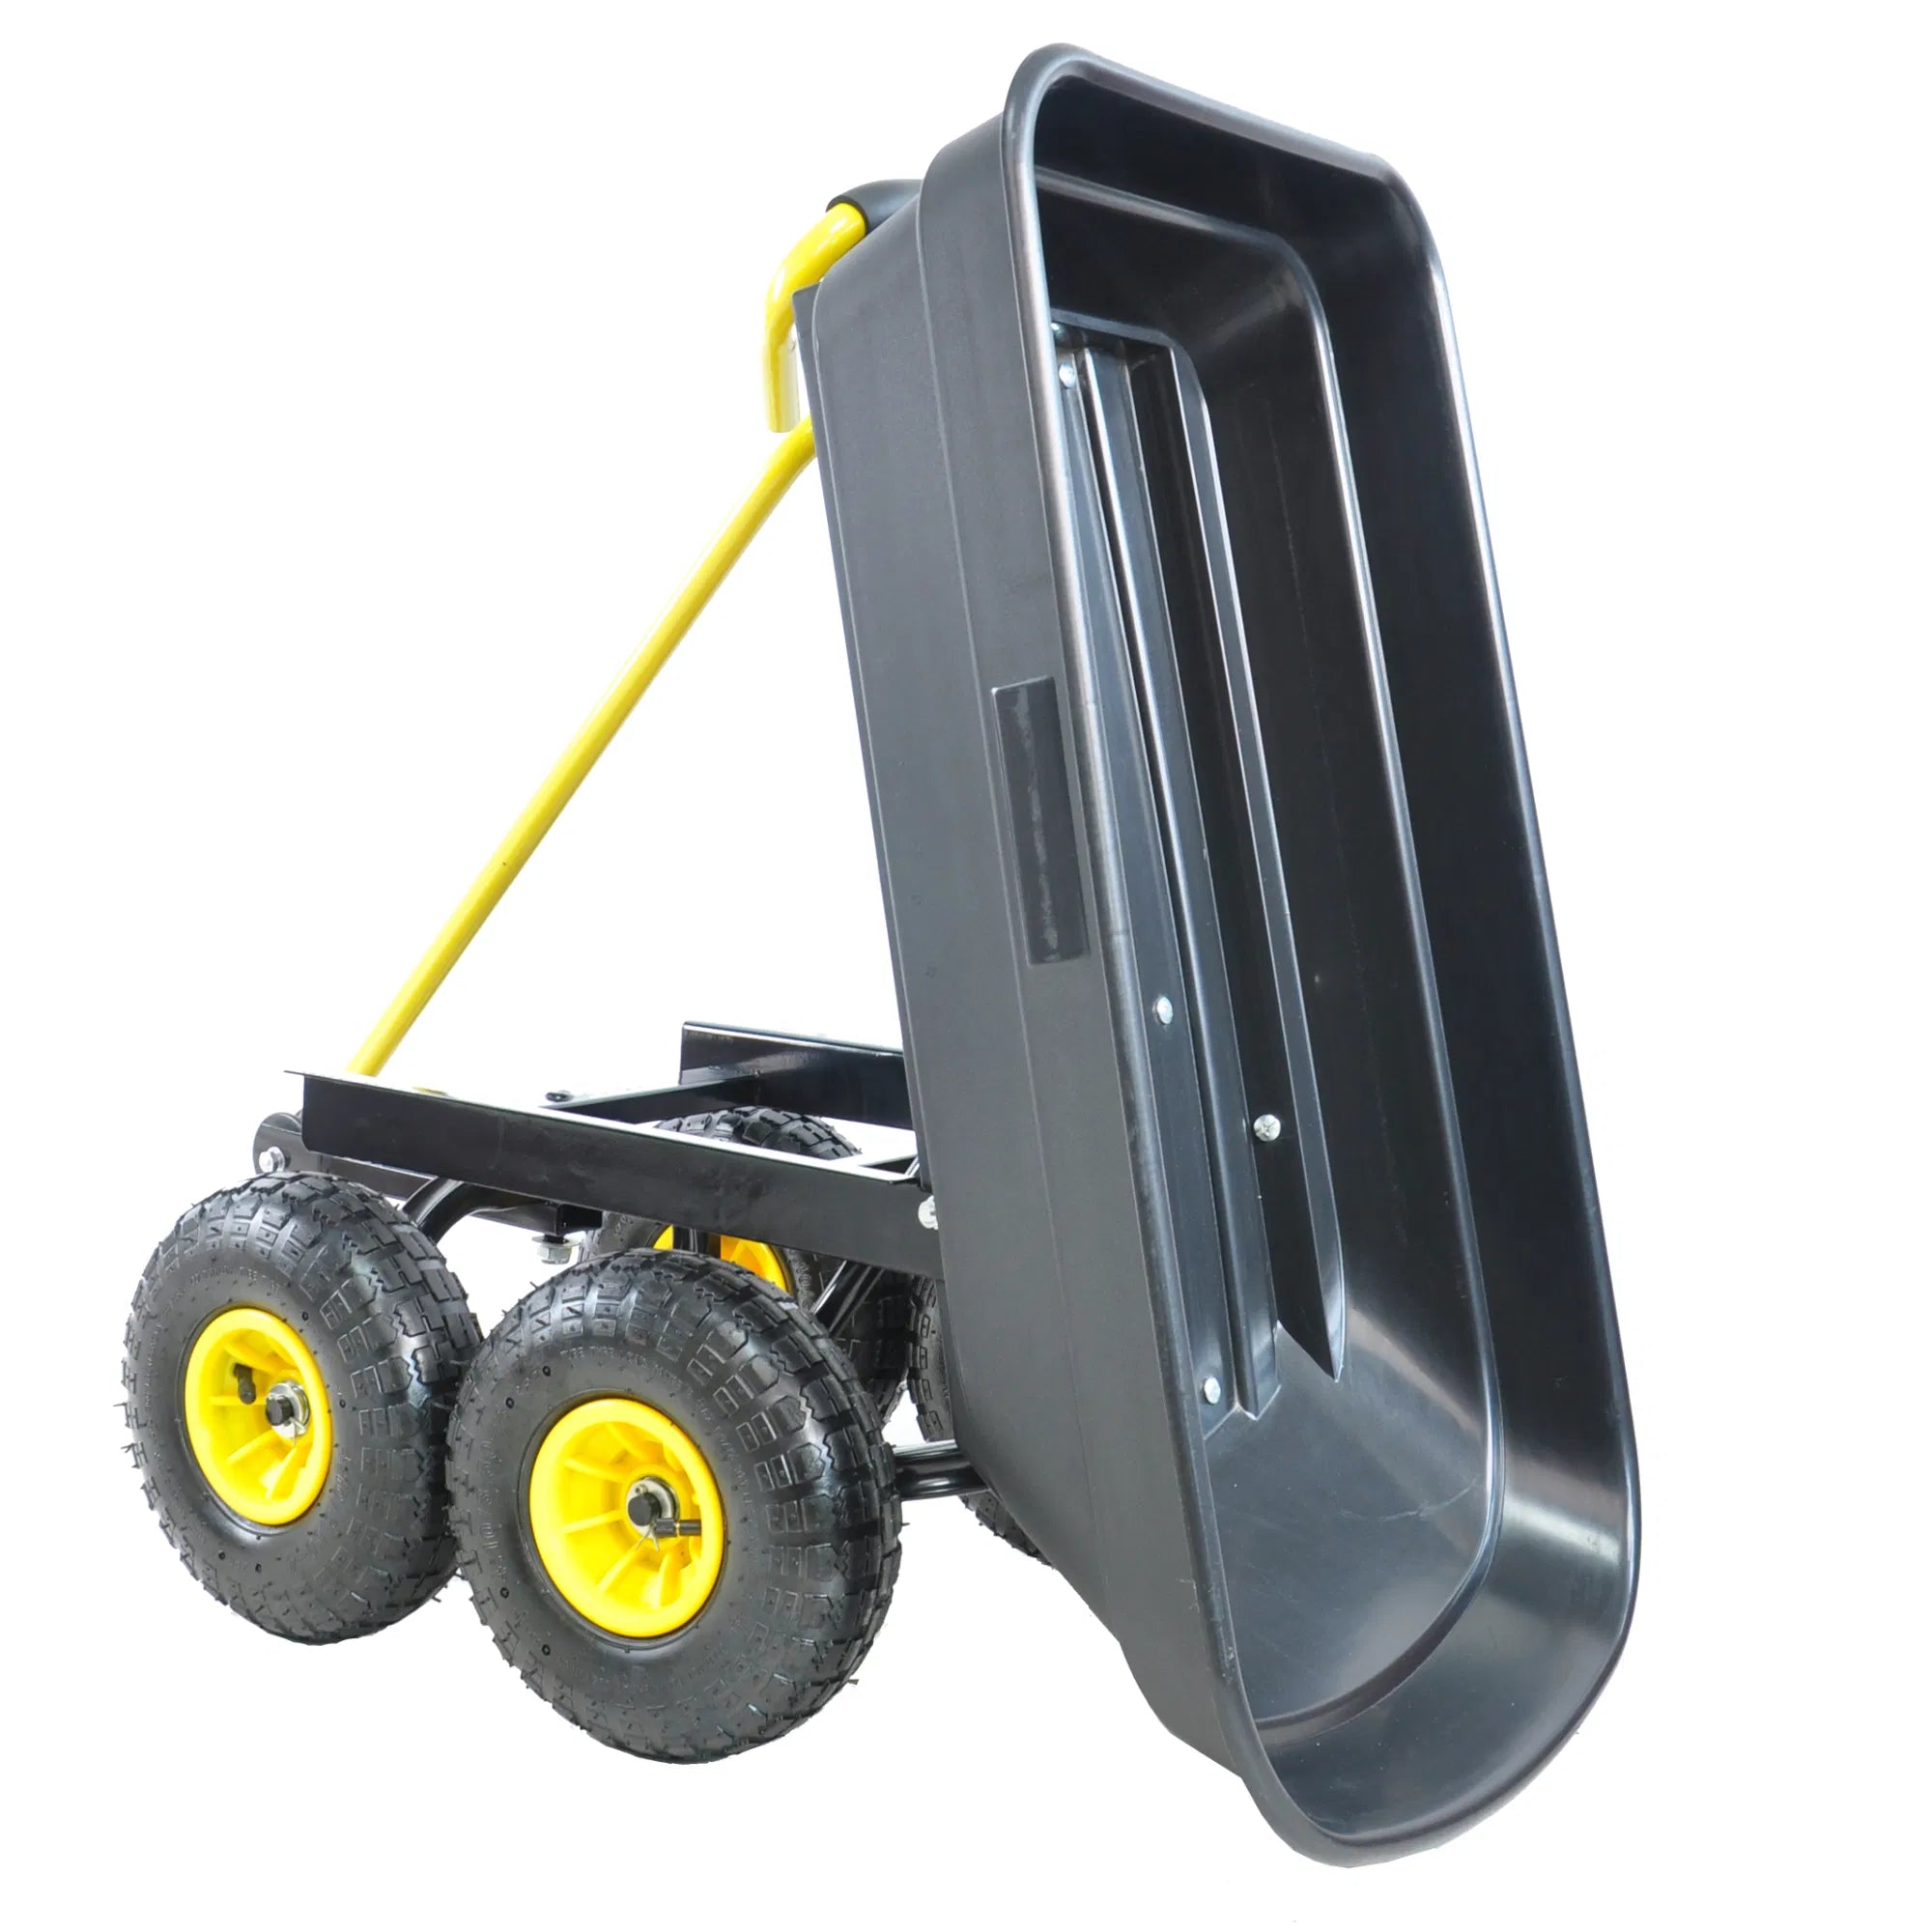 Folding wagon Poly Garden Dump Cart with Steel Frame and 10-in. Pneumatic Tires; 300-Pound Capacity